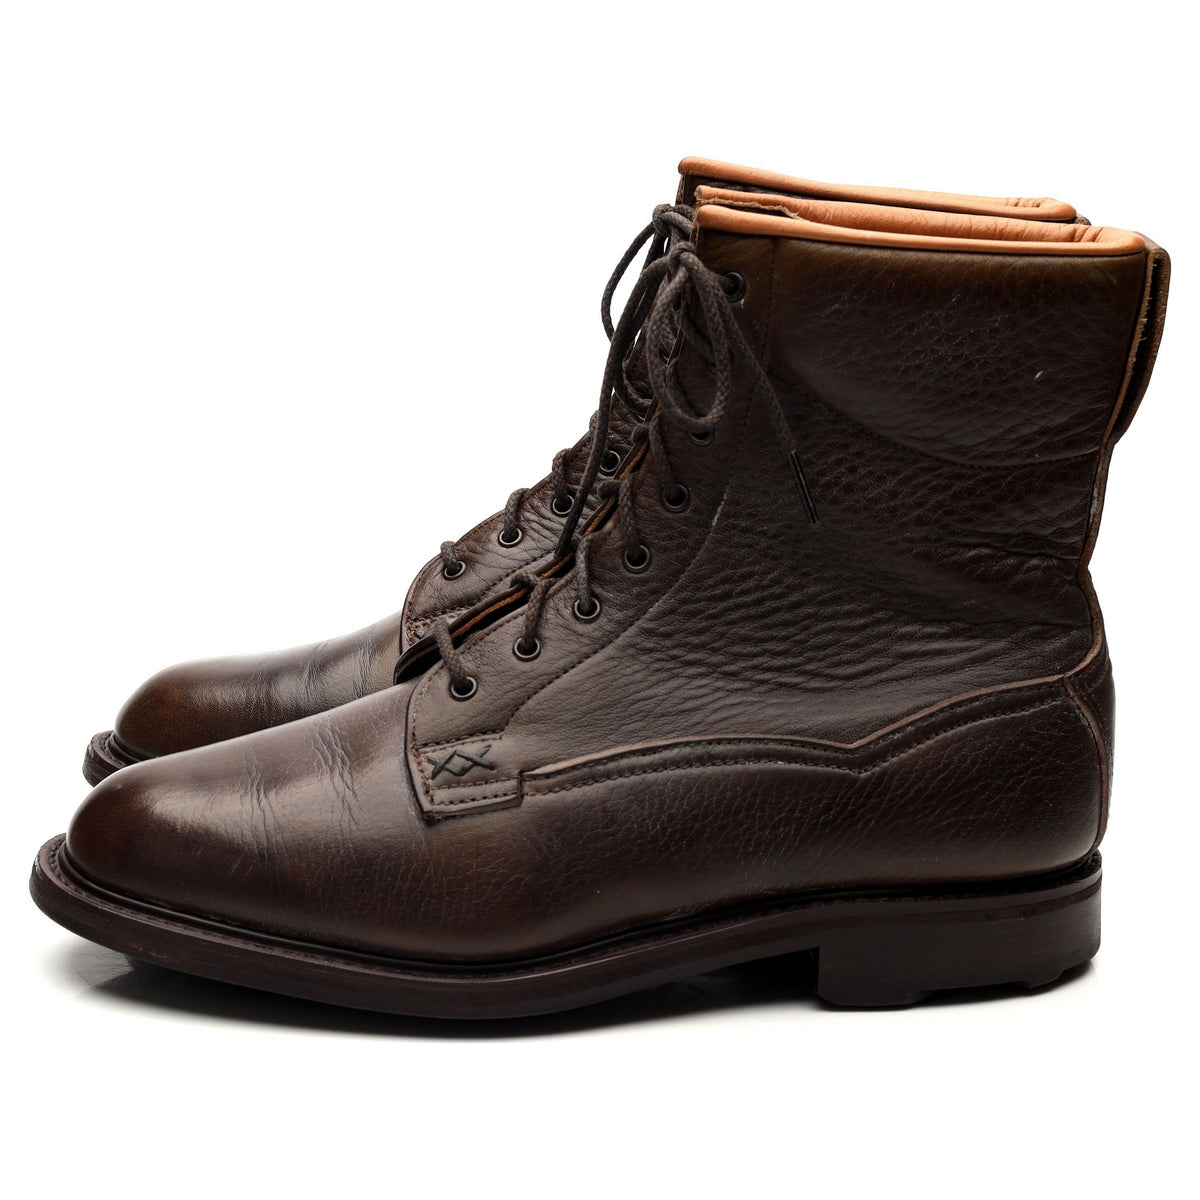 Dark Brown Leather Boots UK 7 F